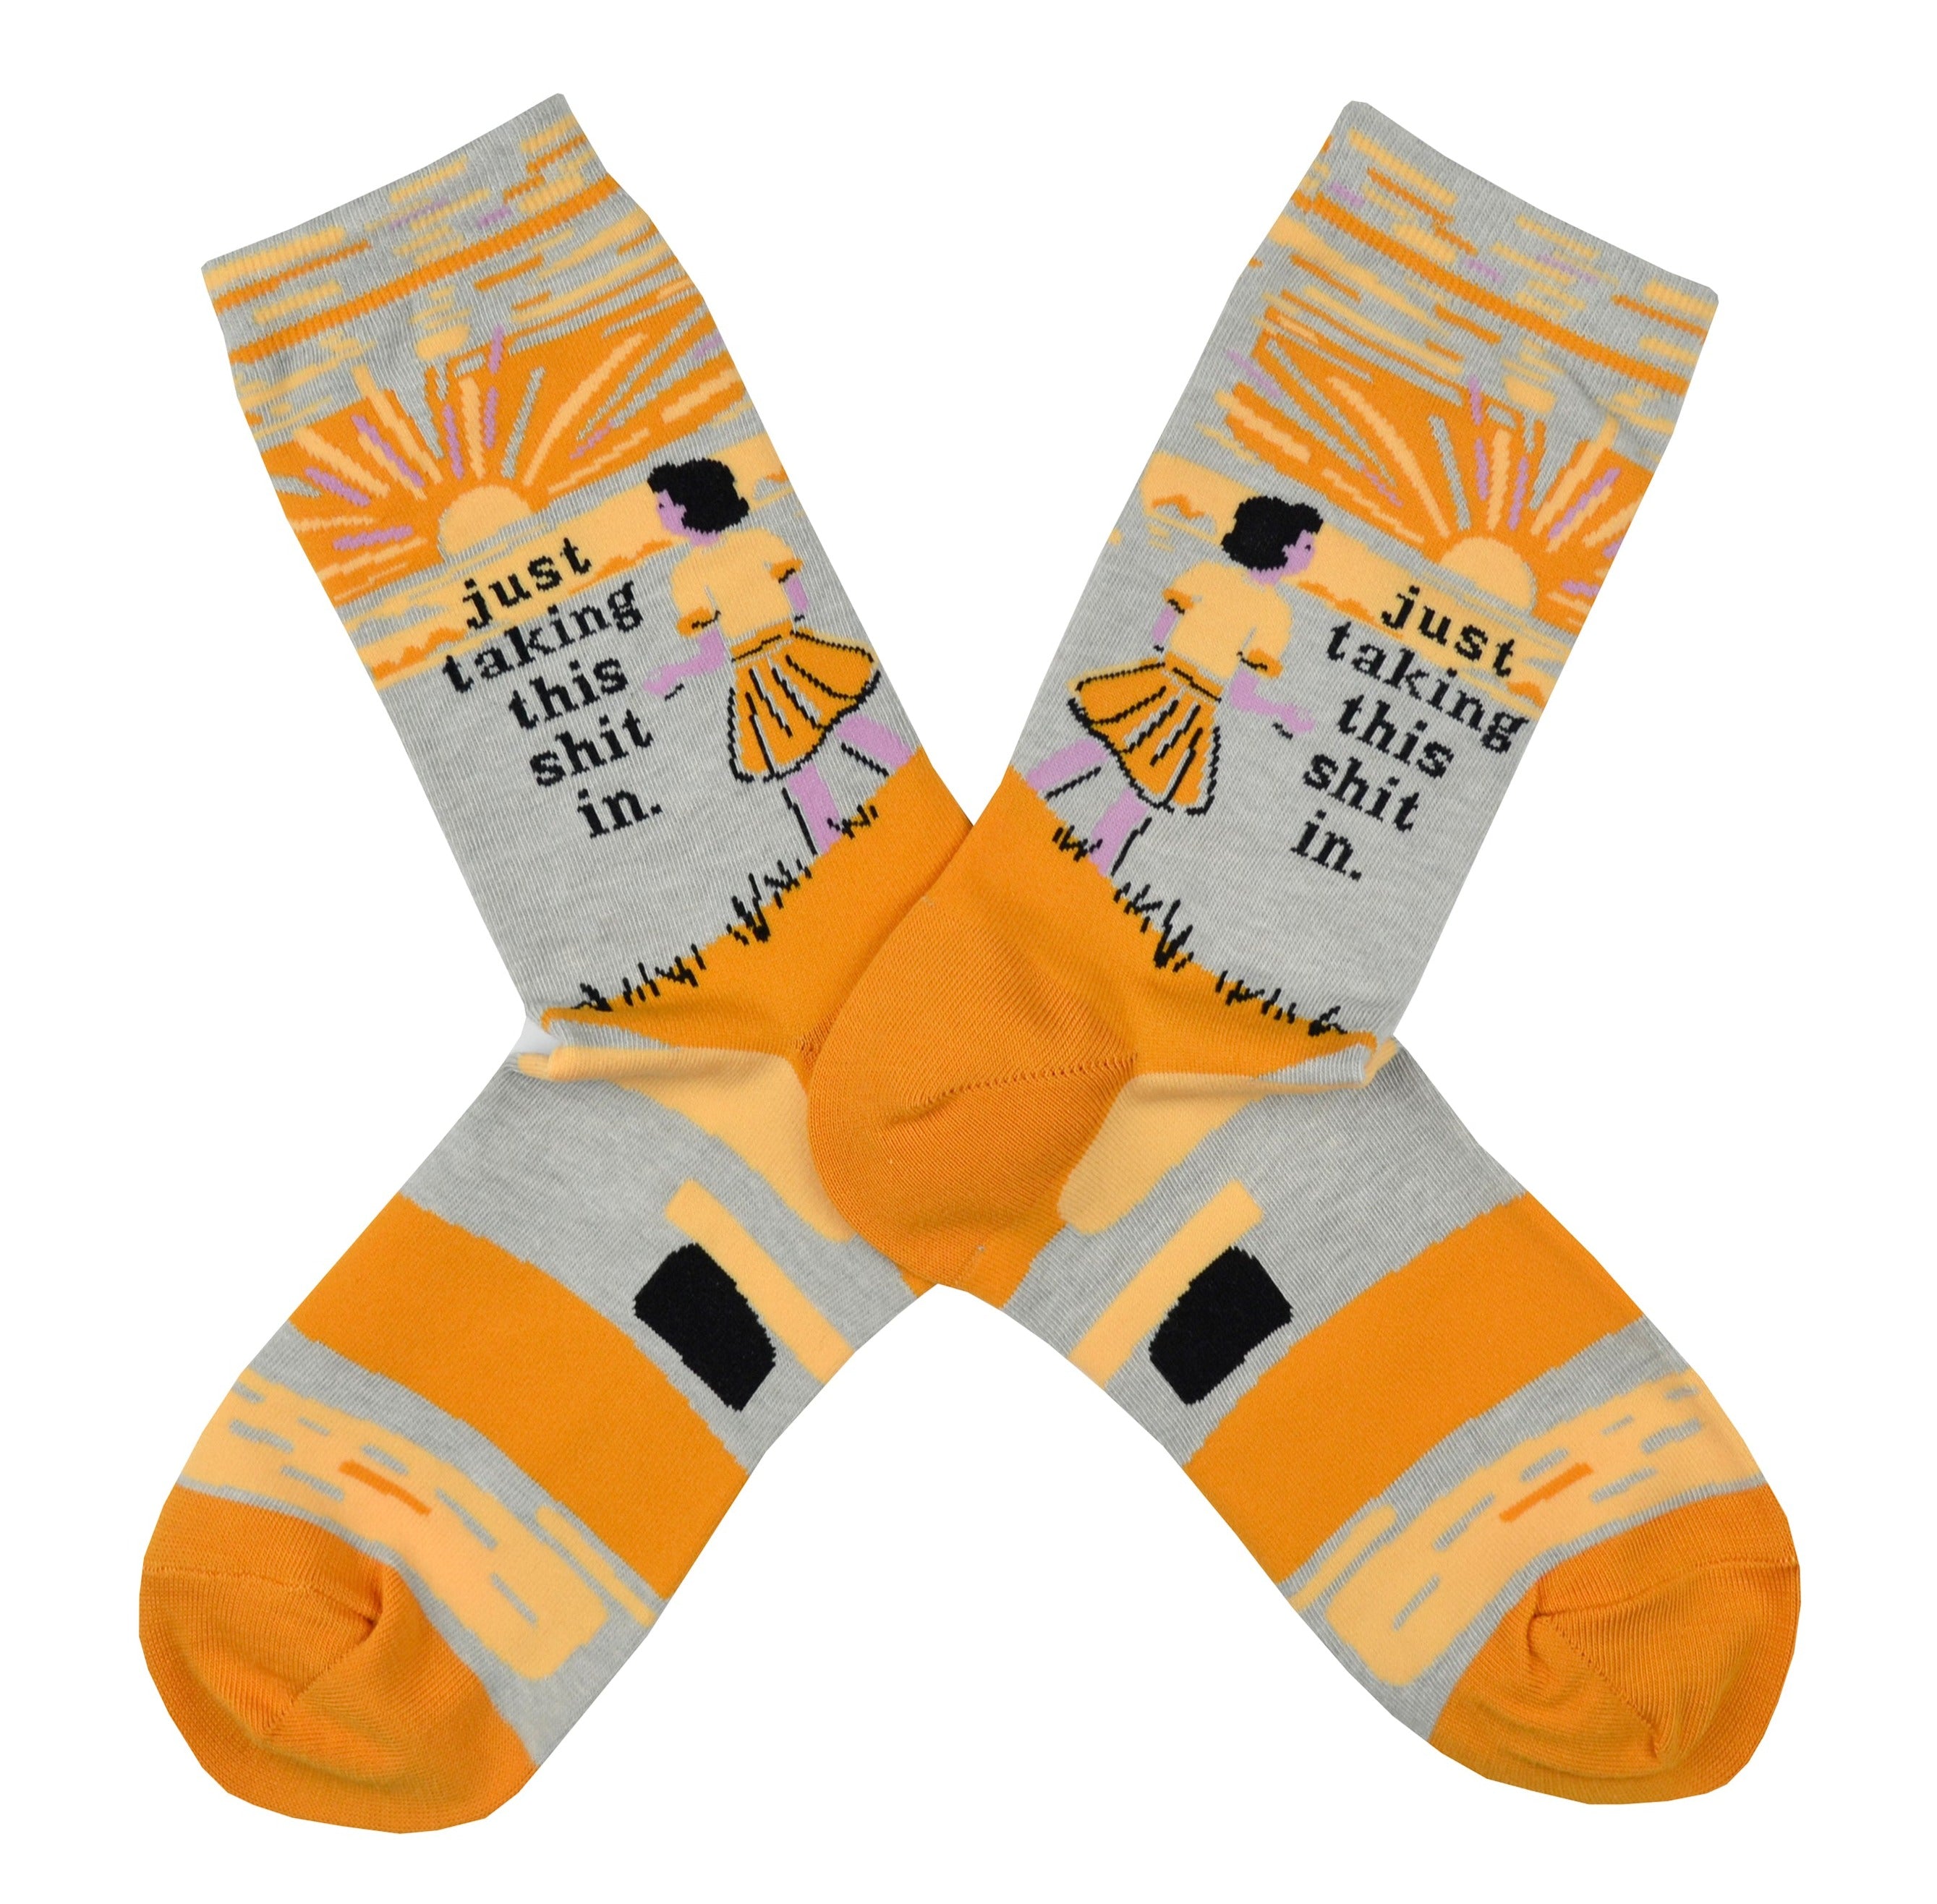 Shown in a flatlay, a pair of light grey socks with an orange heel and toe. These socks feature a cartoon woman watching the sunset with the phrase, 